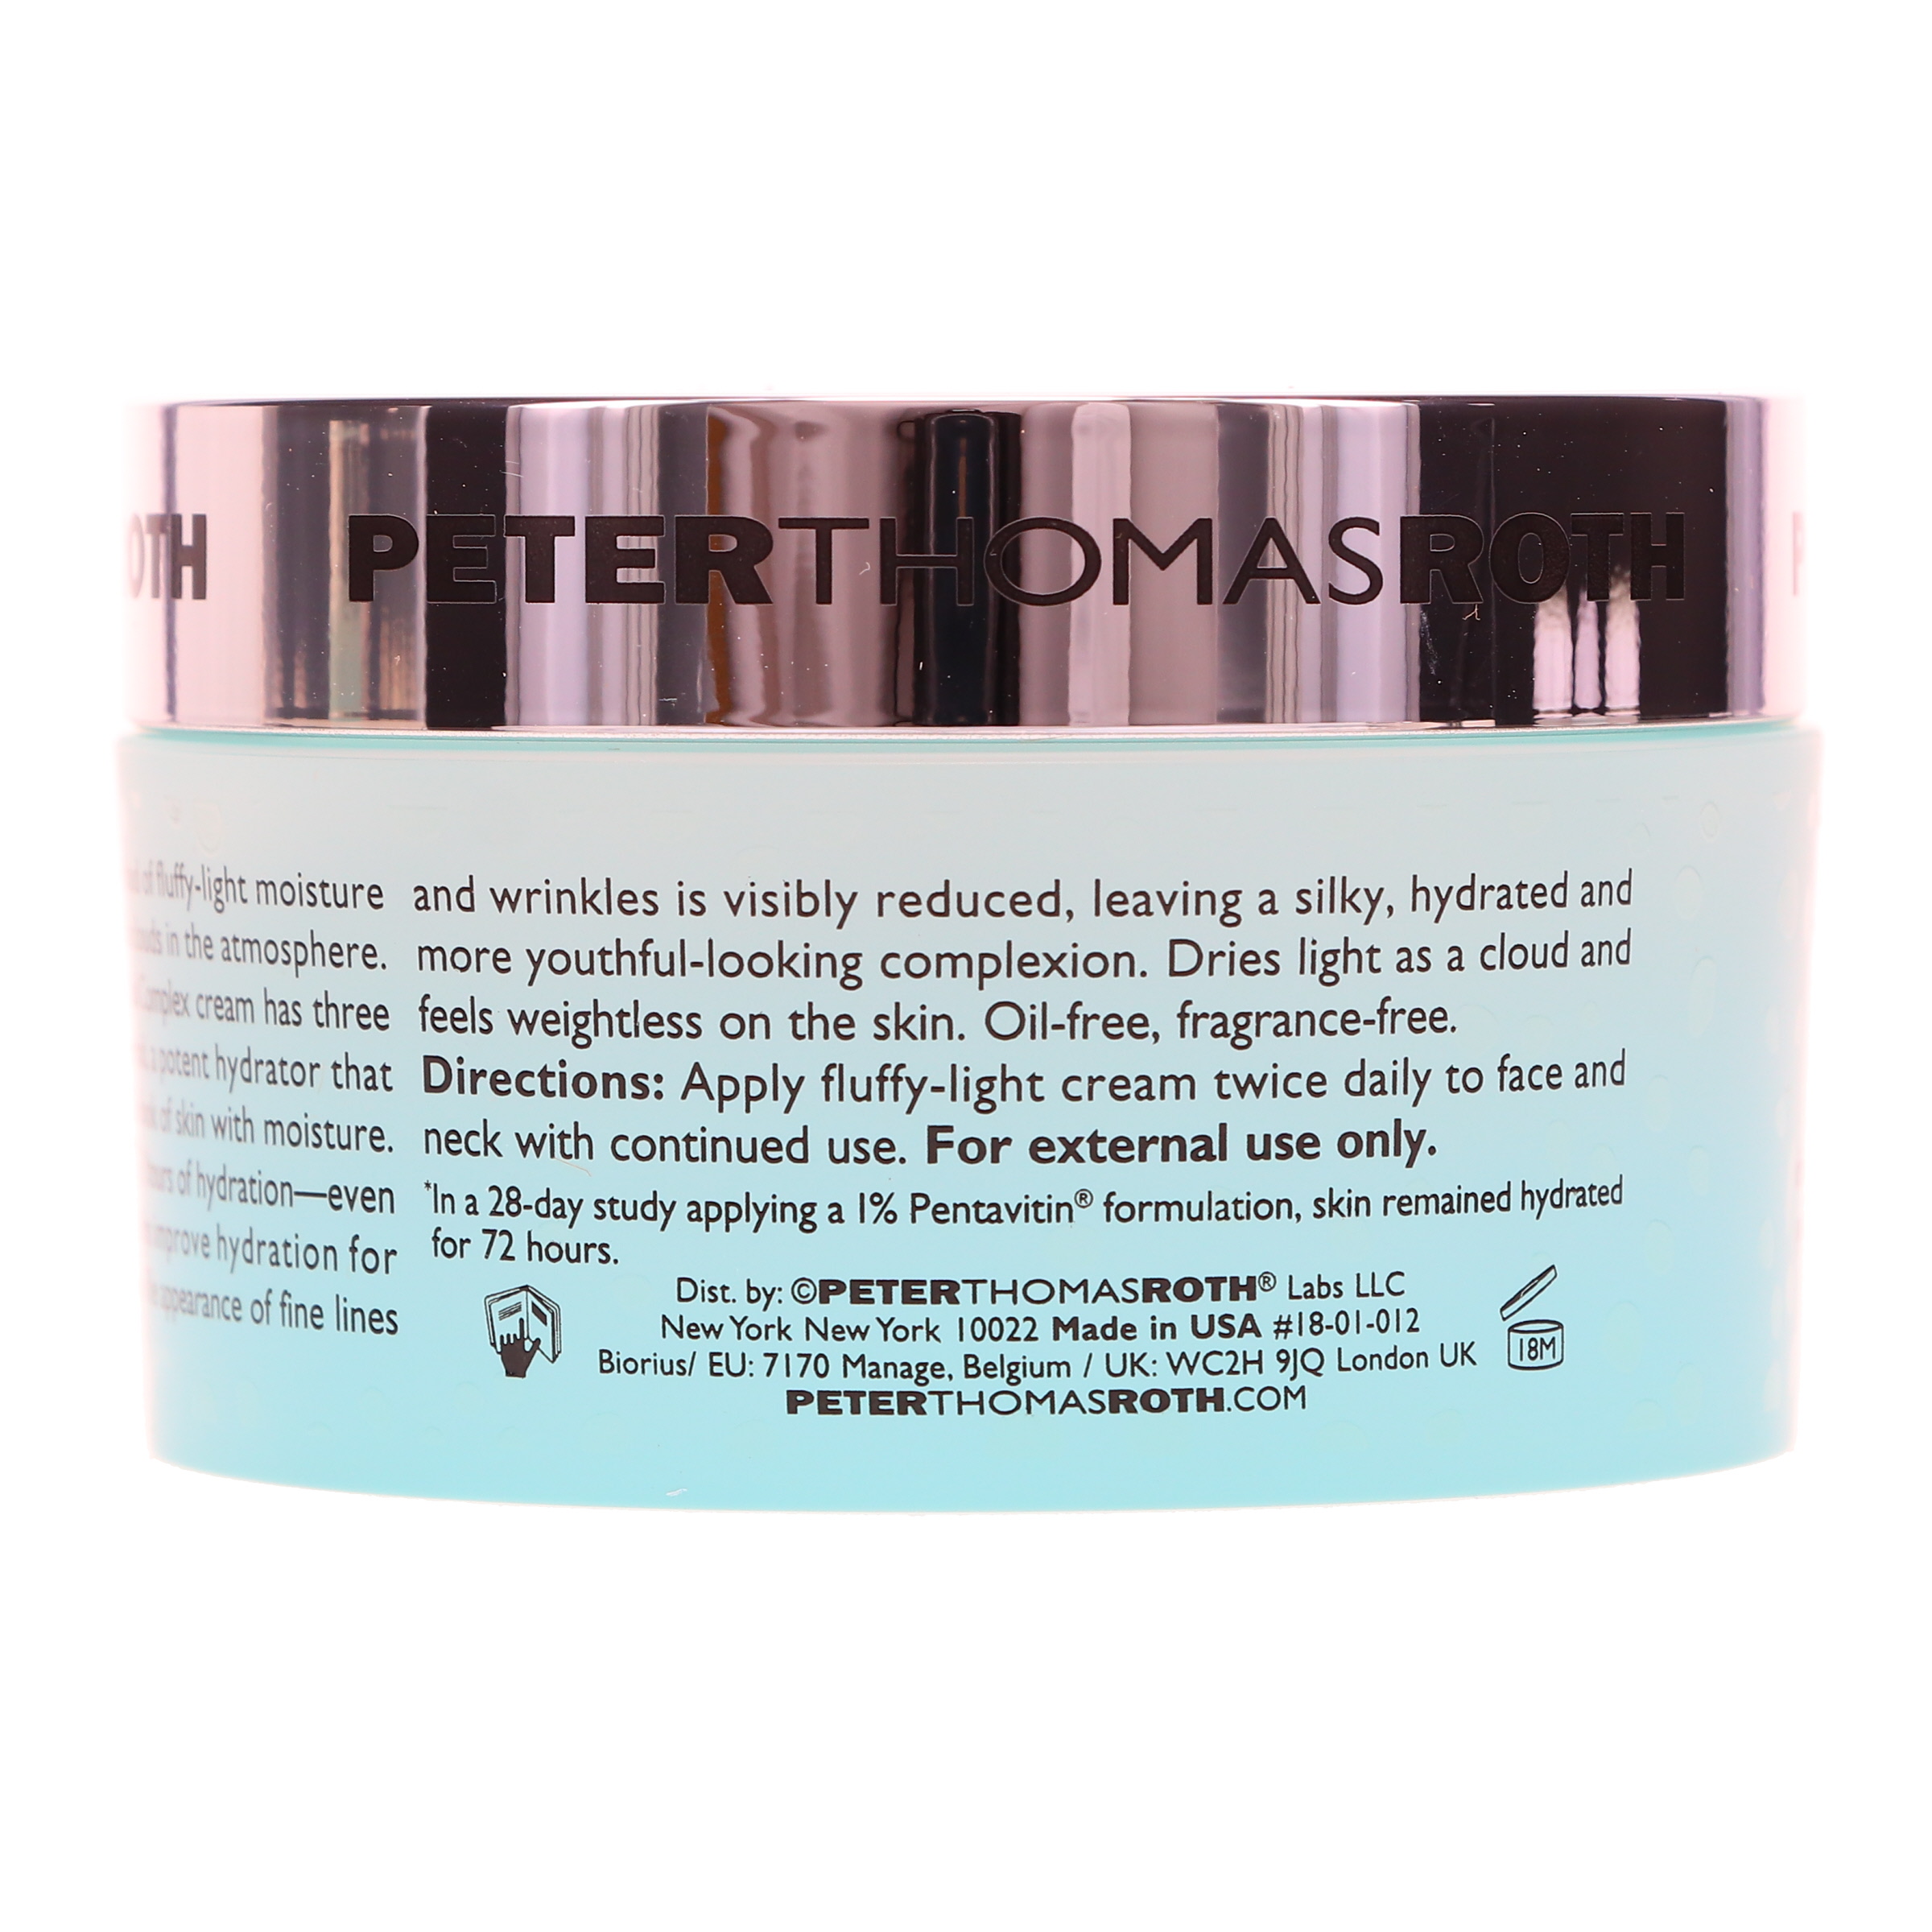 Water Drench Hyaluronic Cloud Cream - image 5 of 8